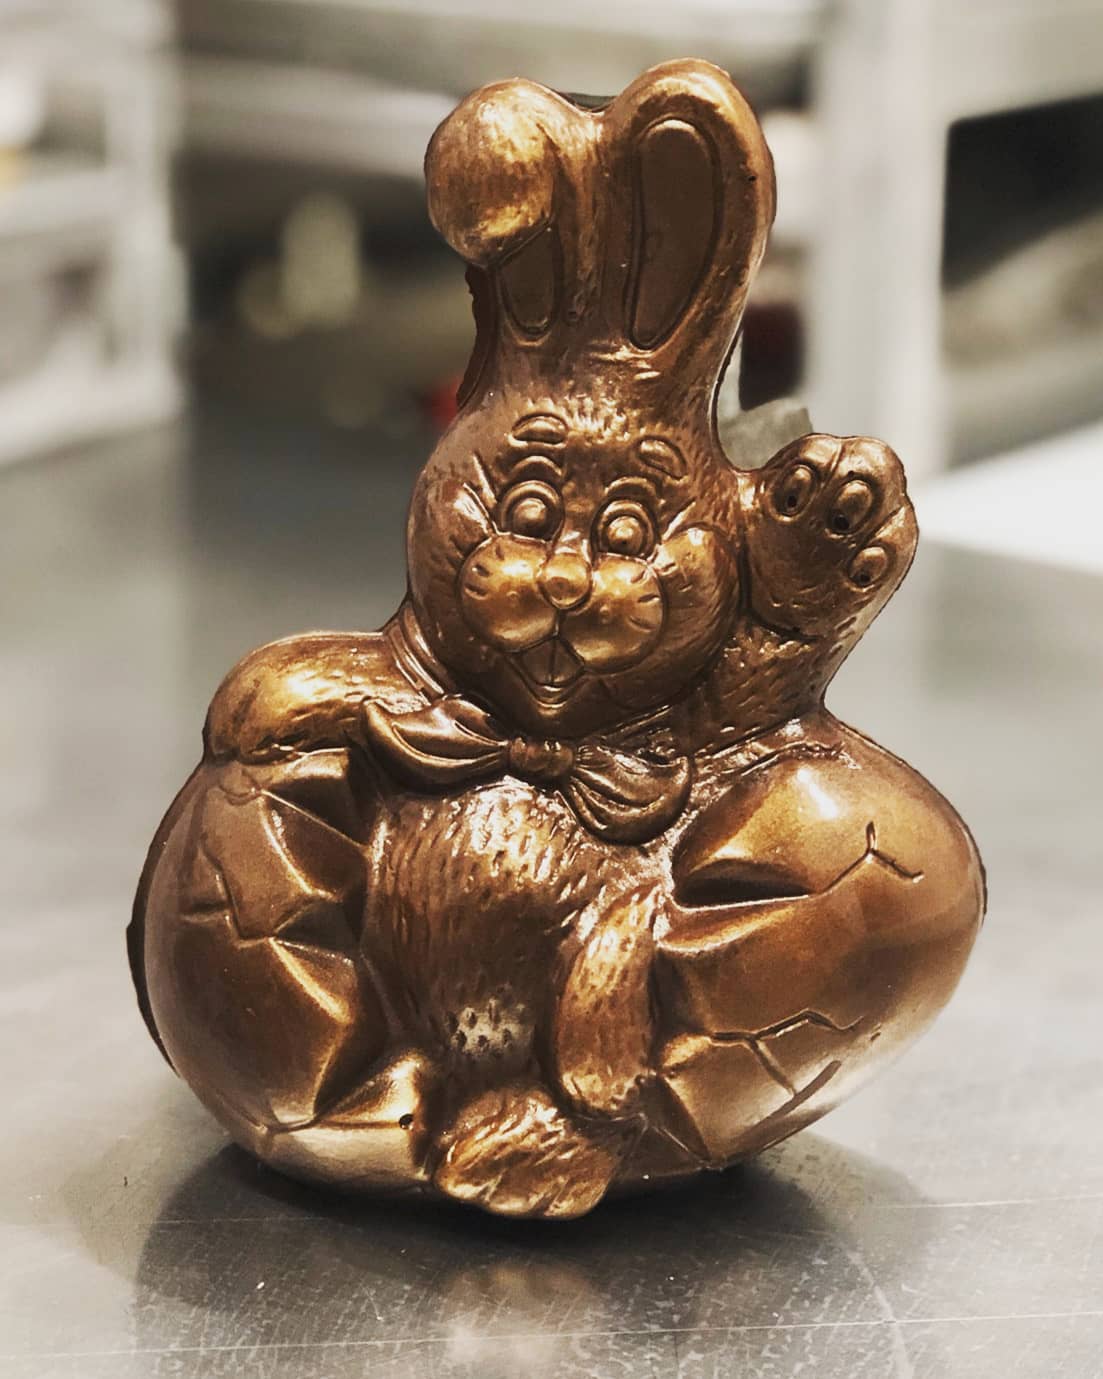 A brass bunny filled with chocolate truffles from Fleur Sauvage in Windsor. (Fleur Sauvage)